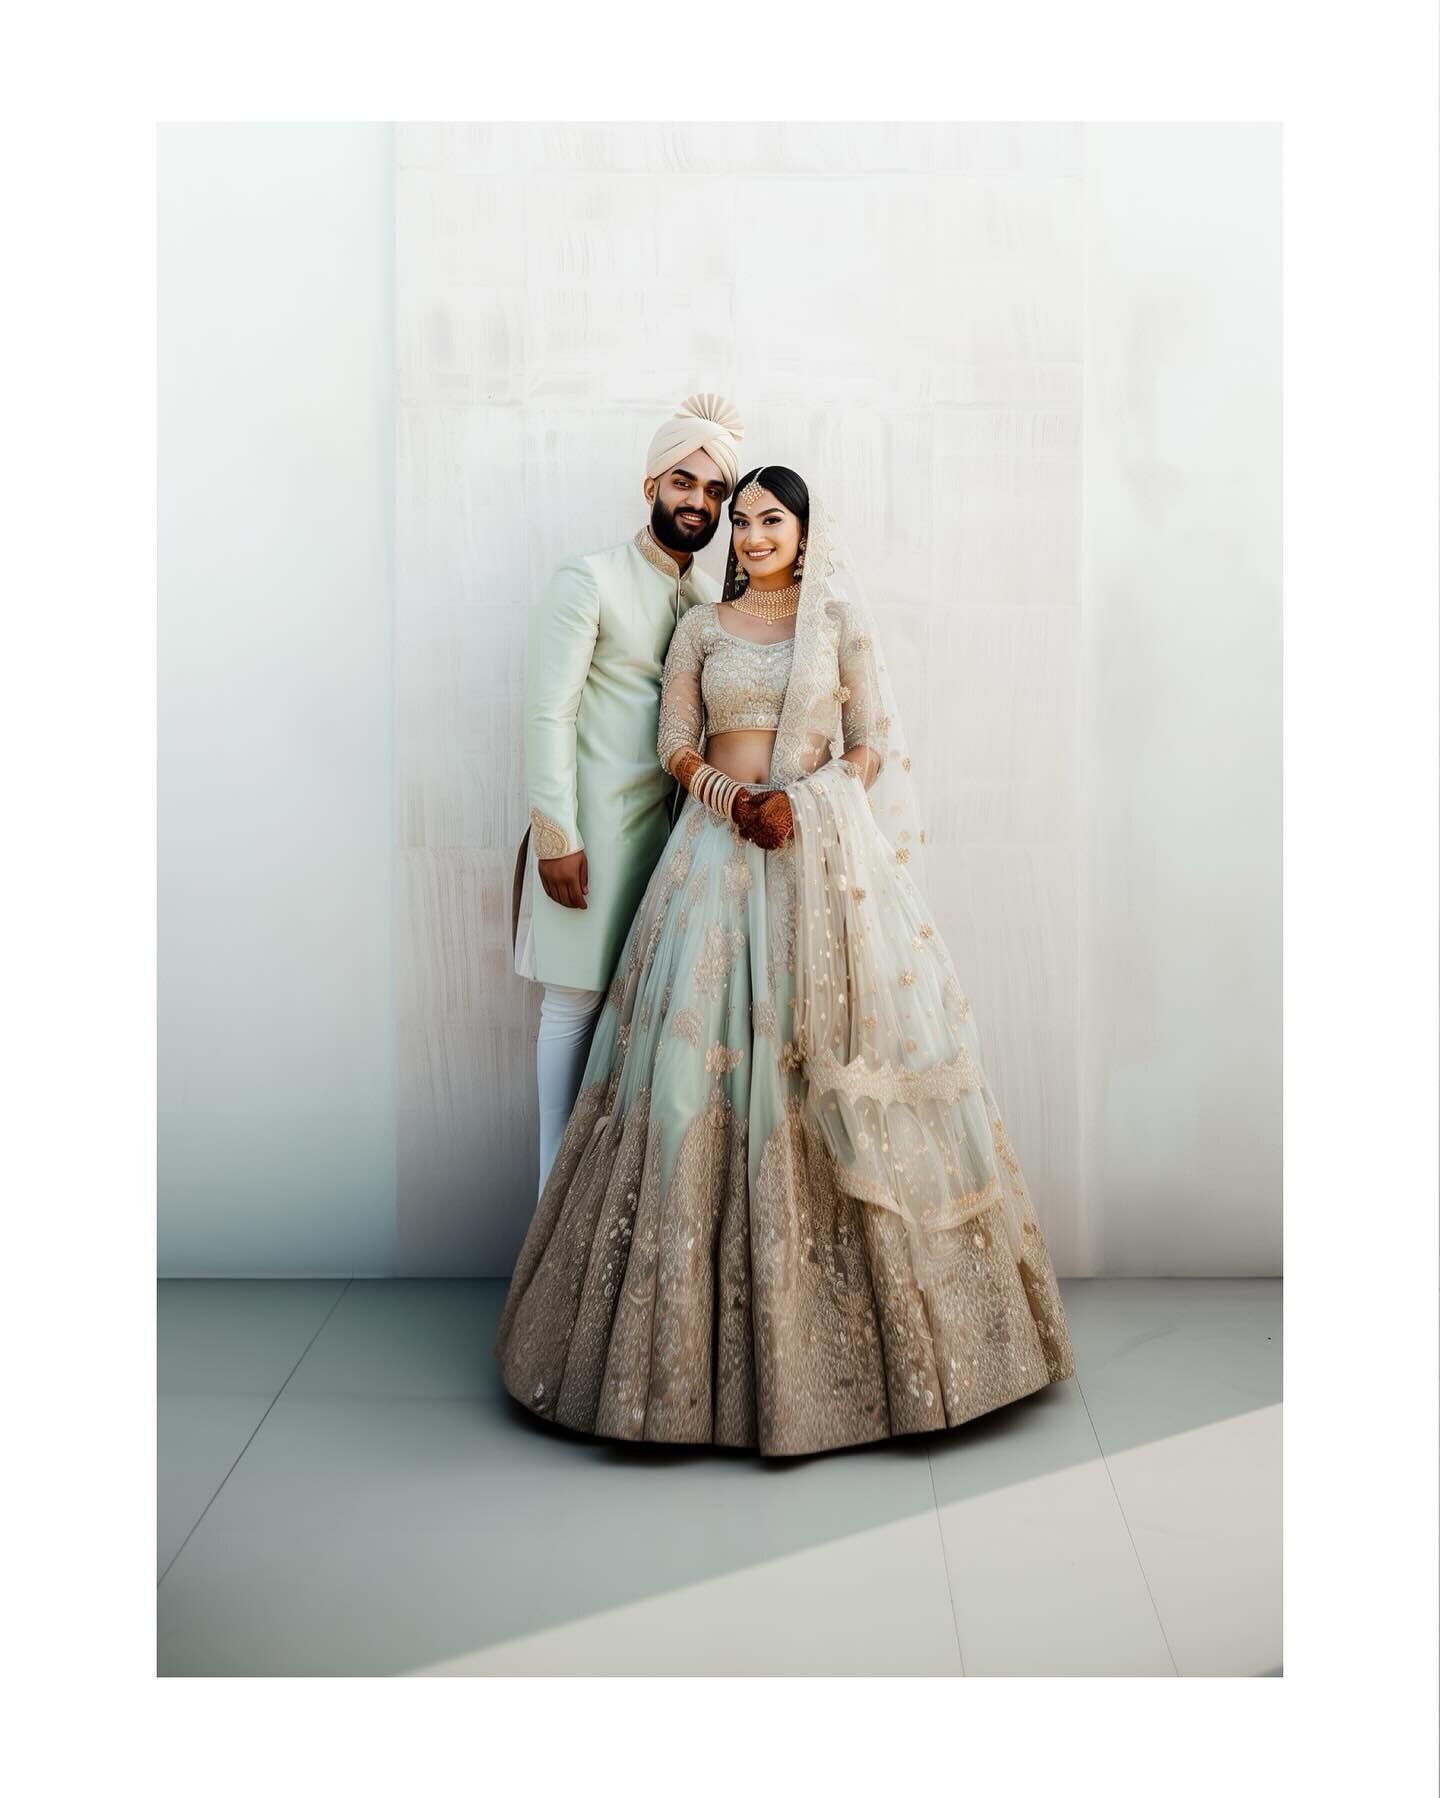 //Currently// sometimes the light just hits right ✨

&bull;
&bull;
&bull;
wedding photography, wedding, Indian wedding, south Asian wedding, desi wedding, brown bride, bride to be, engagement photography, engagement